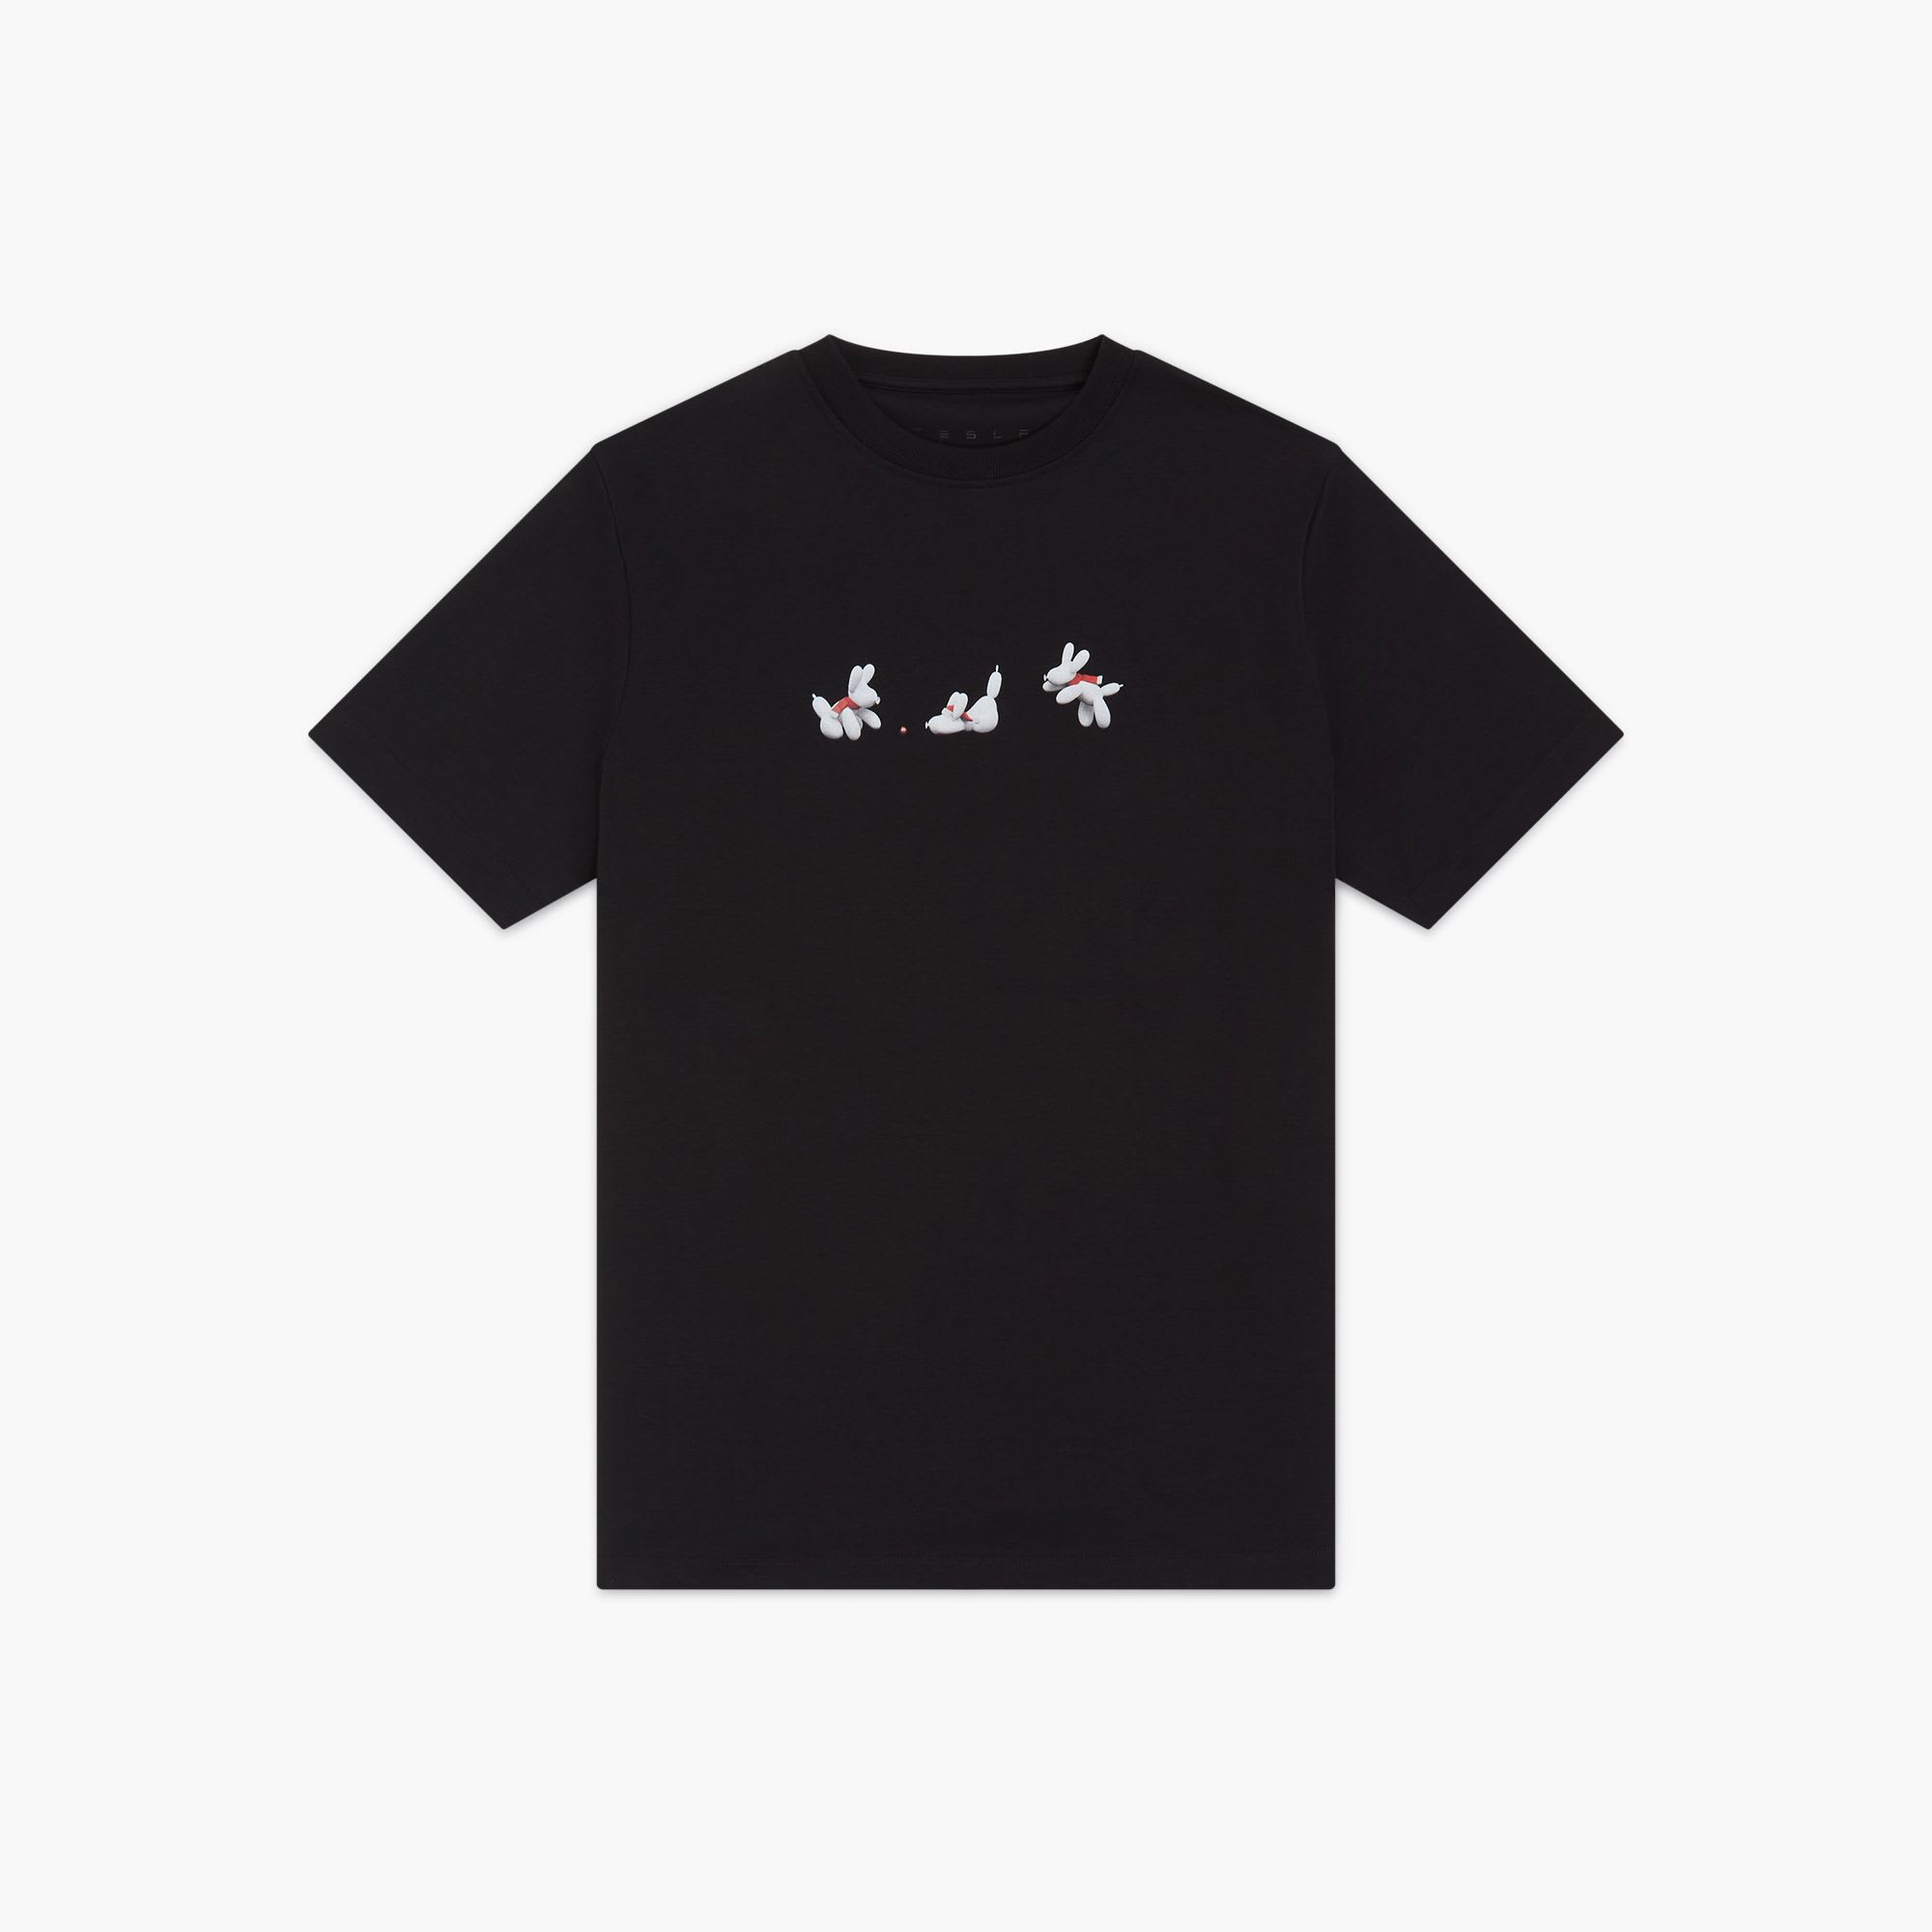 "Don't Worry" T-Shirt